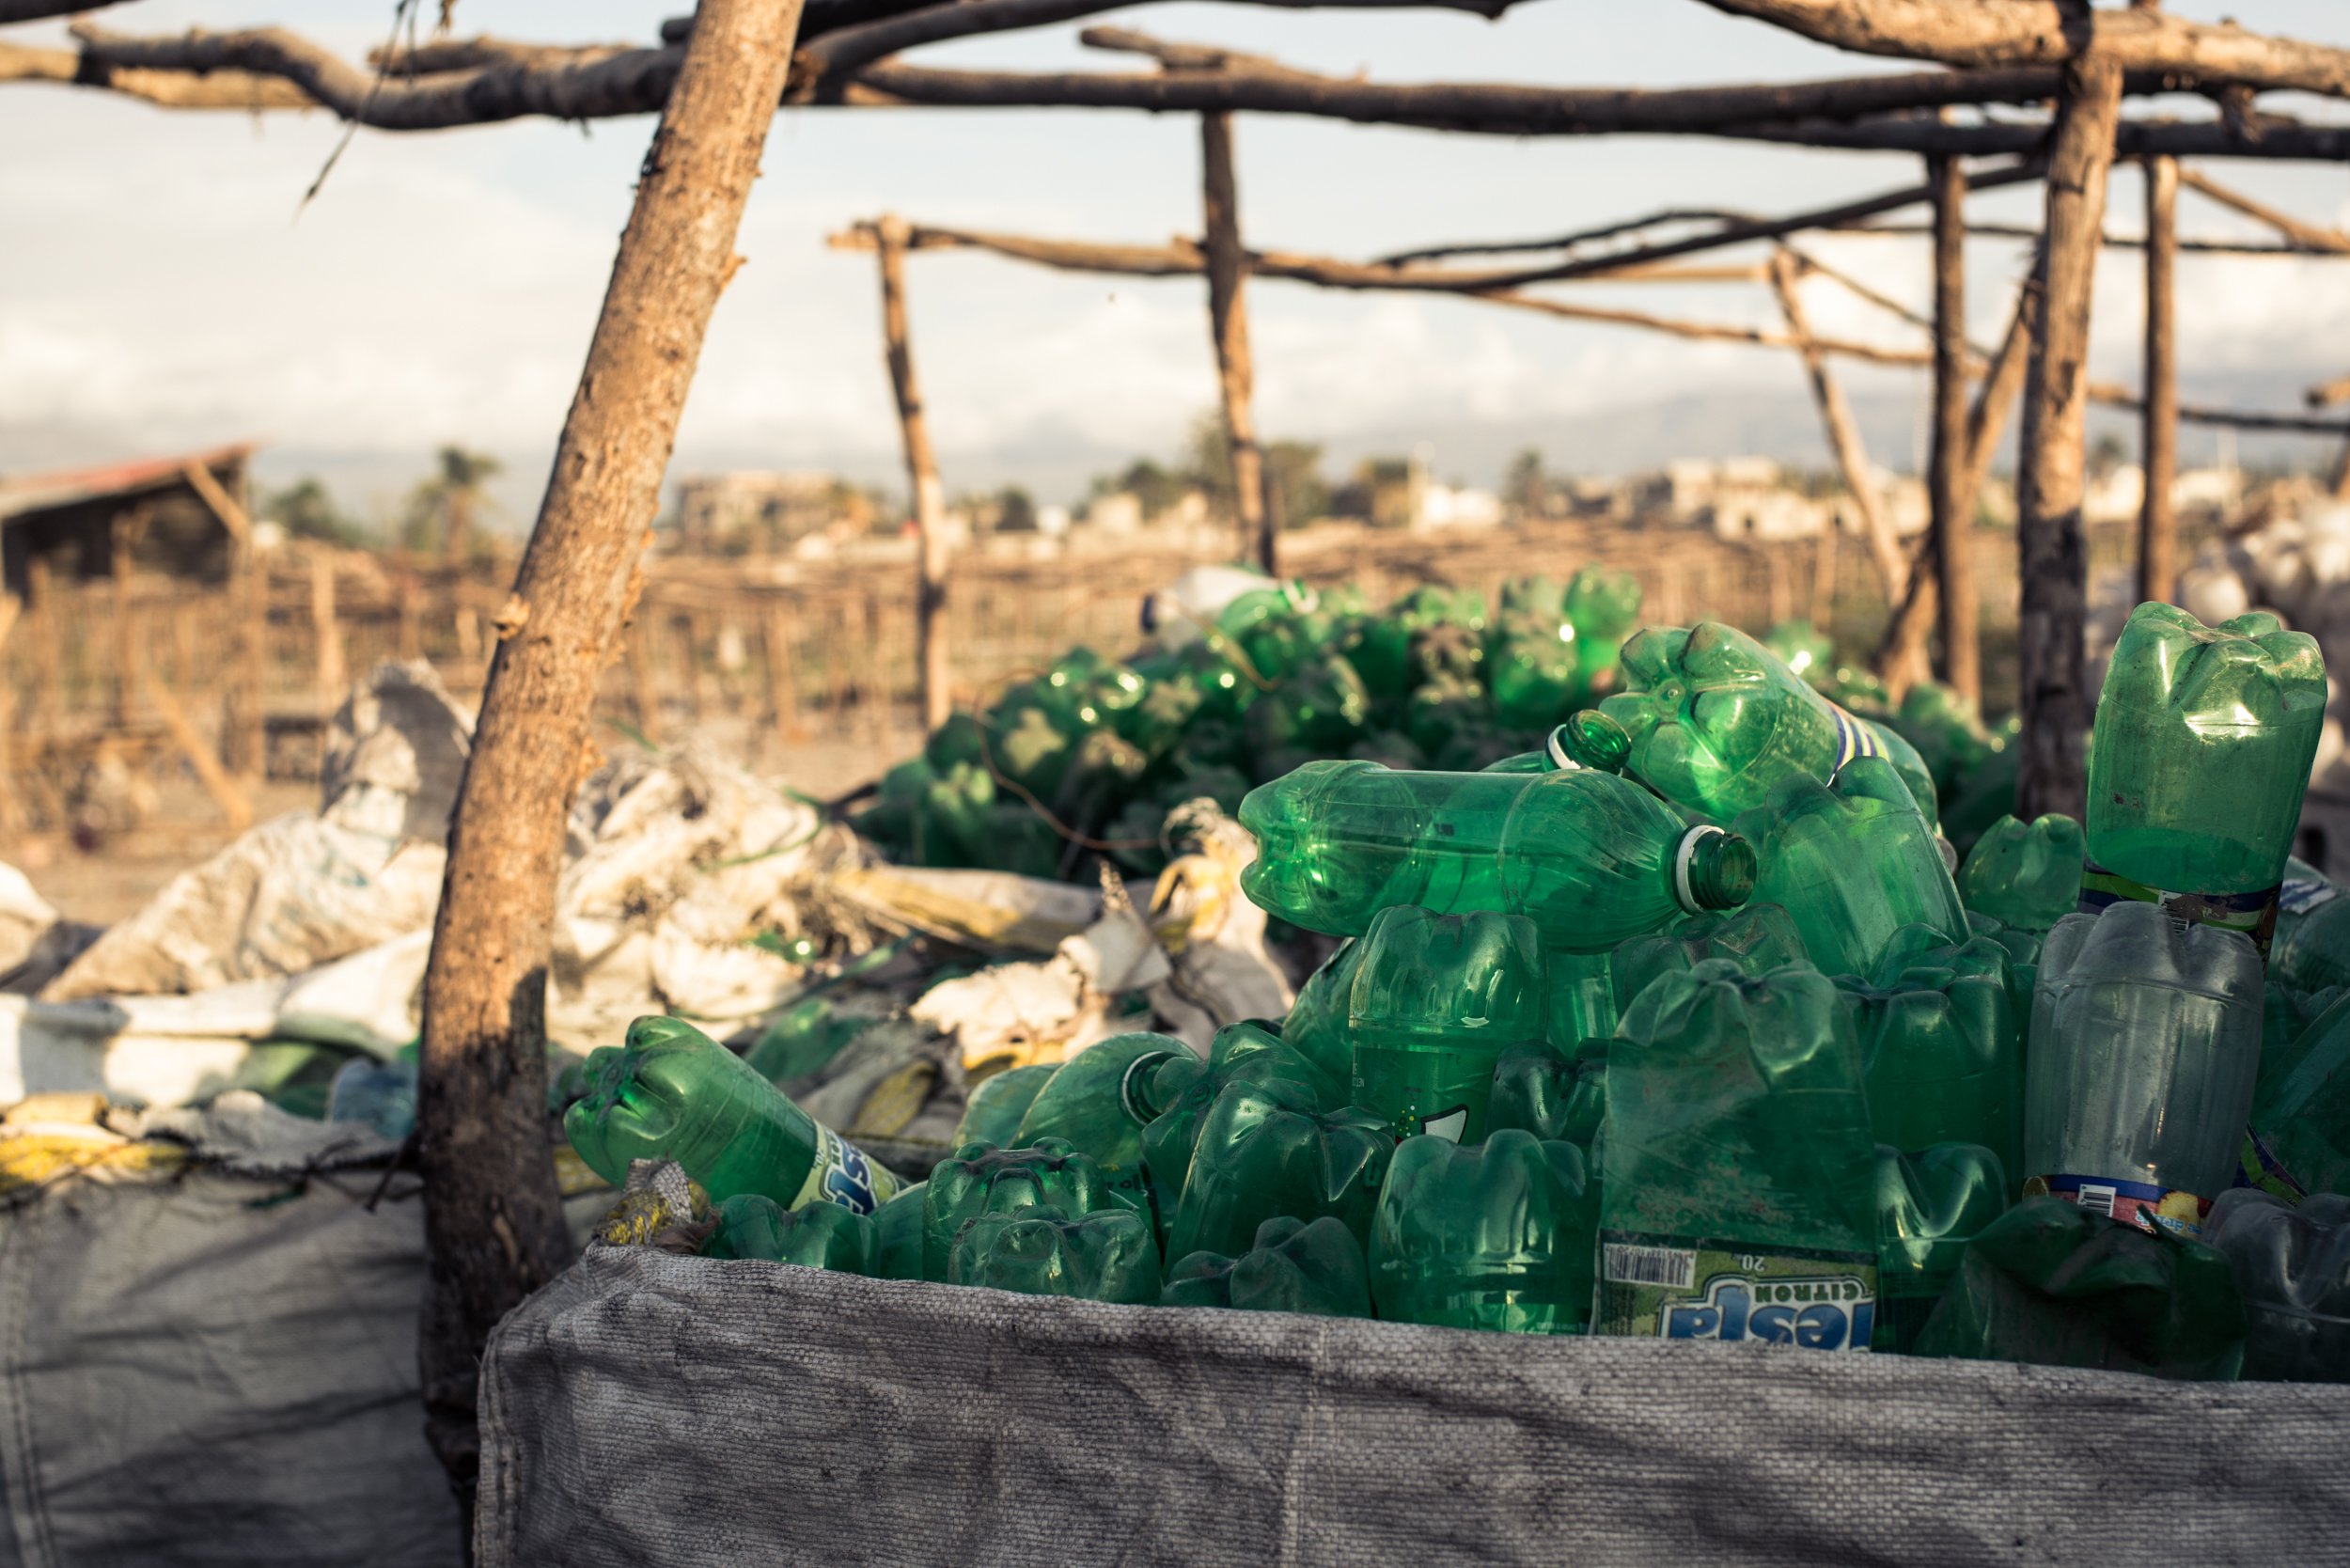  Once plastic bottles are gathered and sorted, they go into super sacks. Our collection center owners each have a small team who completes this step to enable the material to be delivered and sold to our recycling partner. 